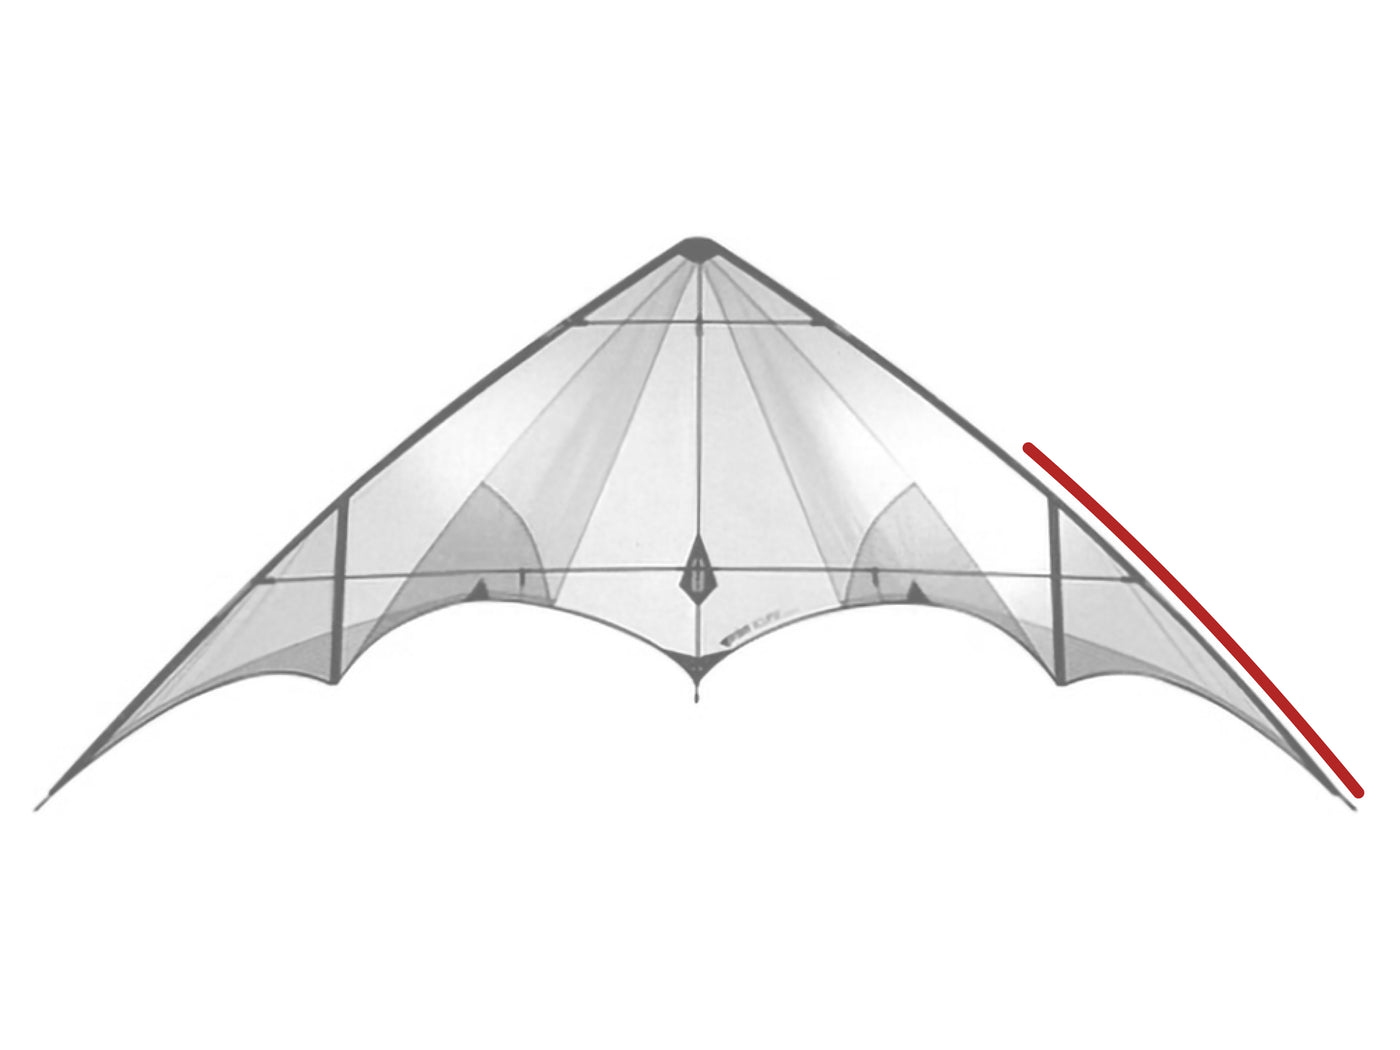 Diagram showing location of the Eclipse Vented Lower Leading Edge on the kite.